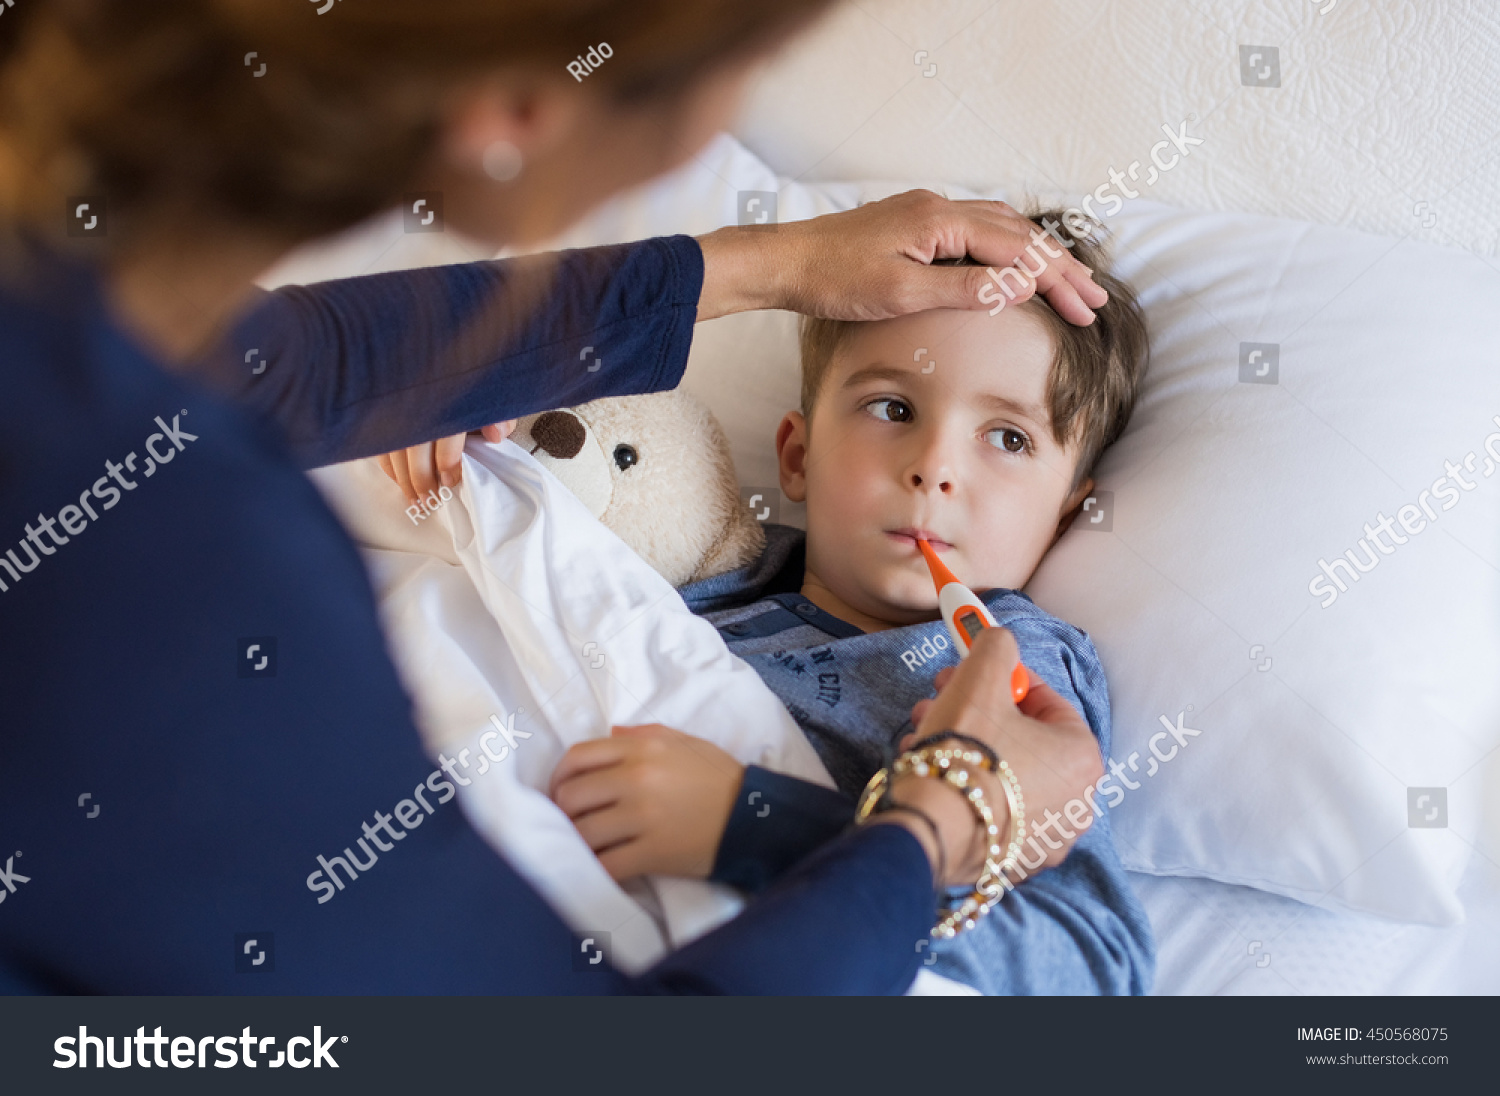 Sick boy with thermometer laying in bed and mother hand taking temperature. Mother checking temperature of her sick son who has thermometer in his mouth. Sick child with fever and illness in bed. #450568075